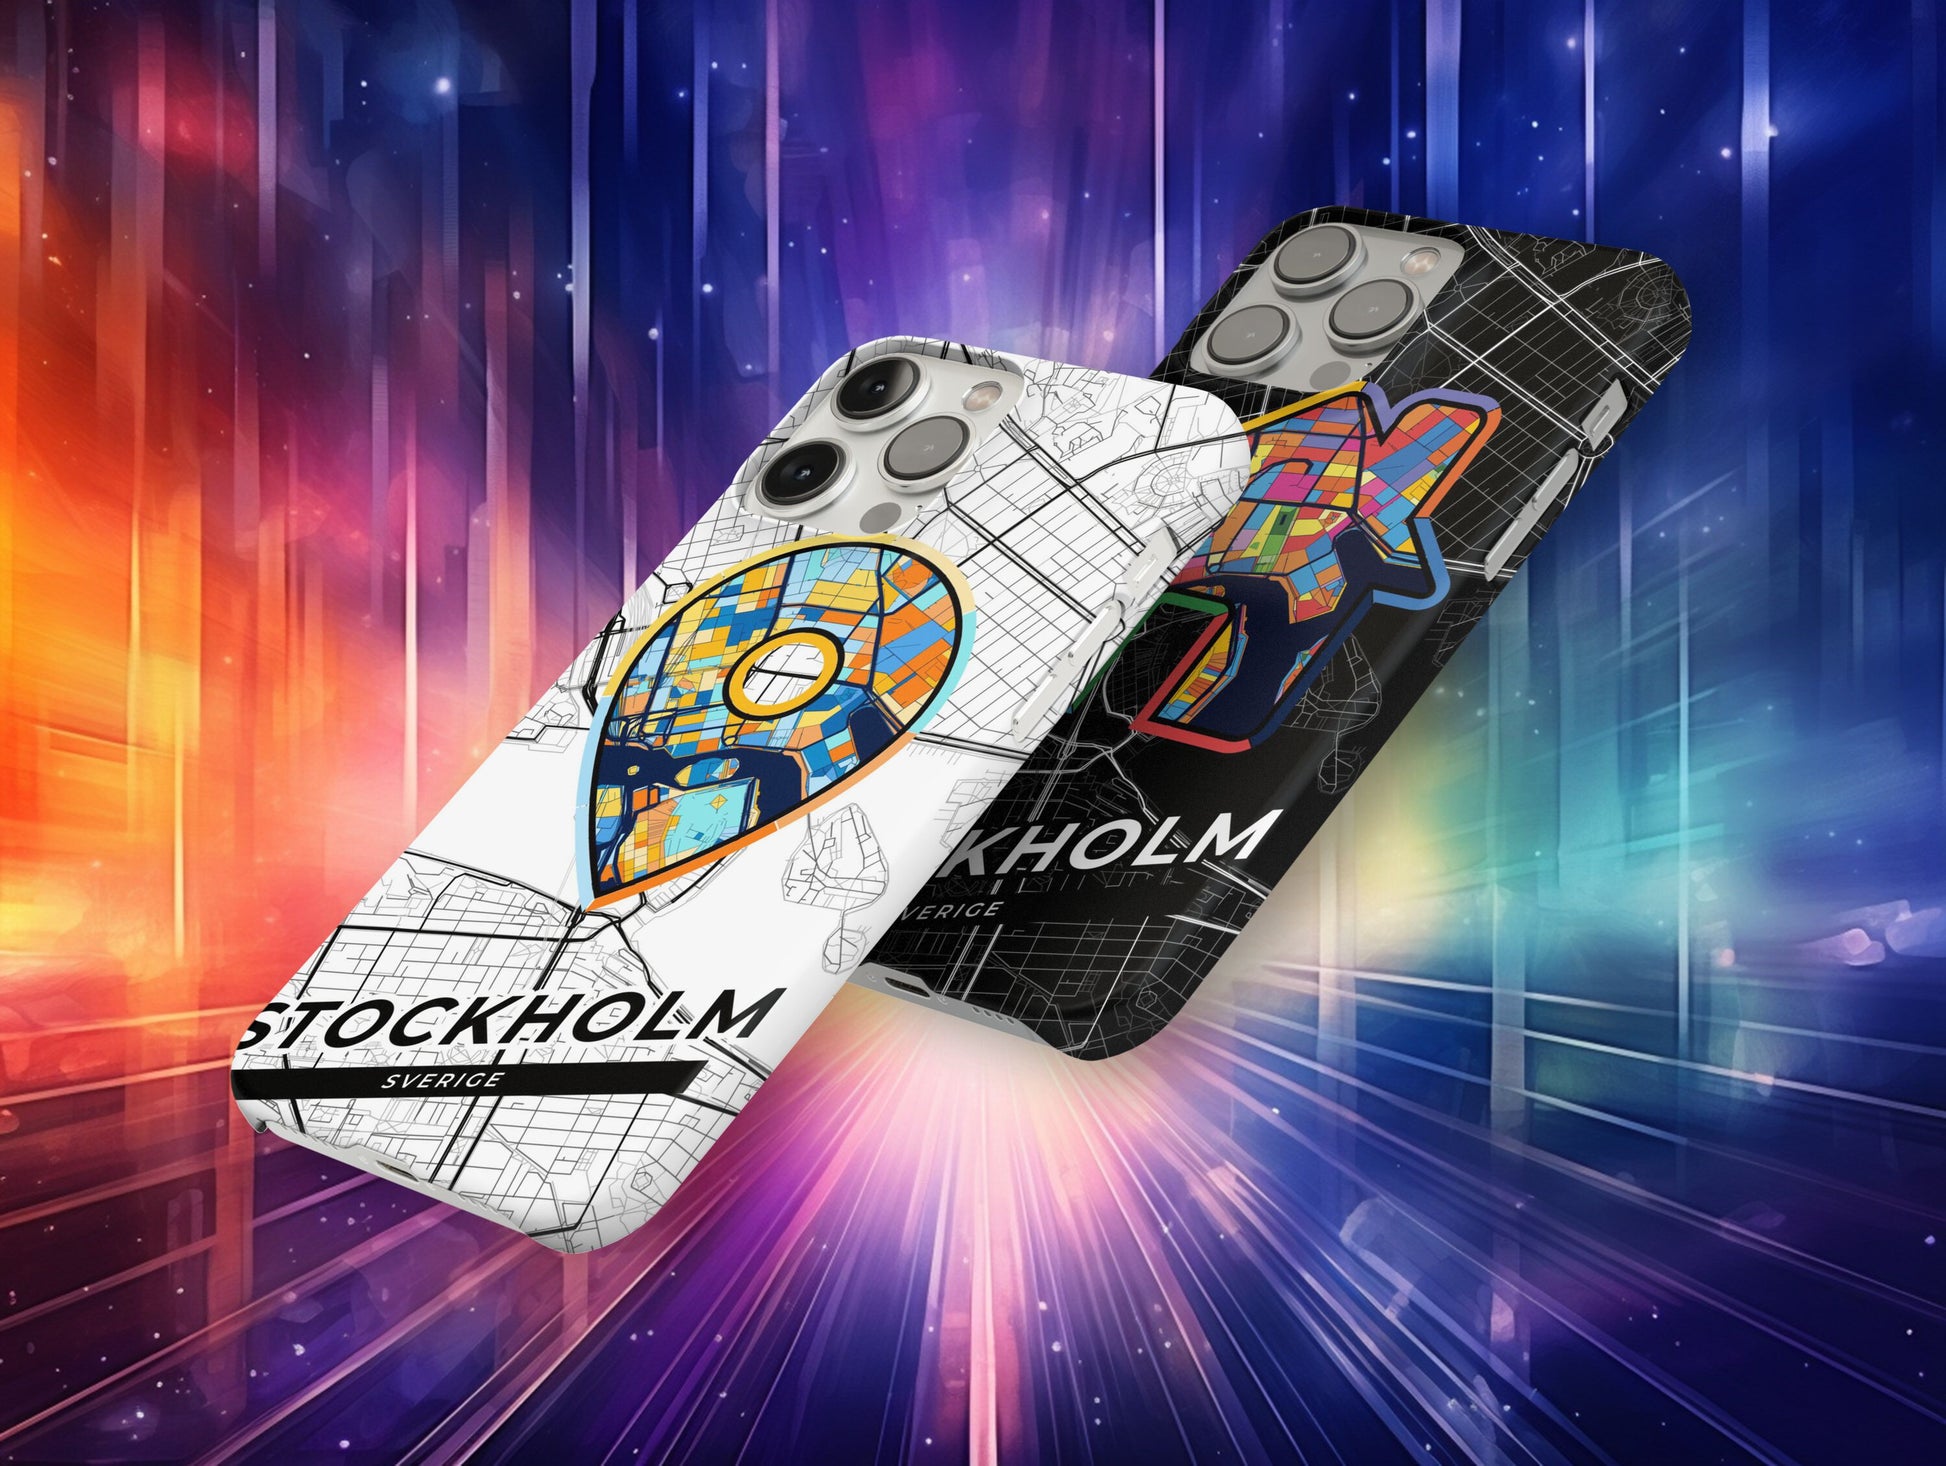 Stockholm Sweden slim phone case with colorful icon